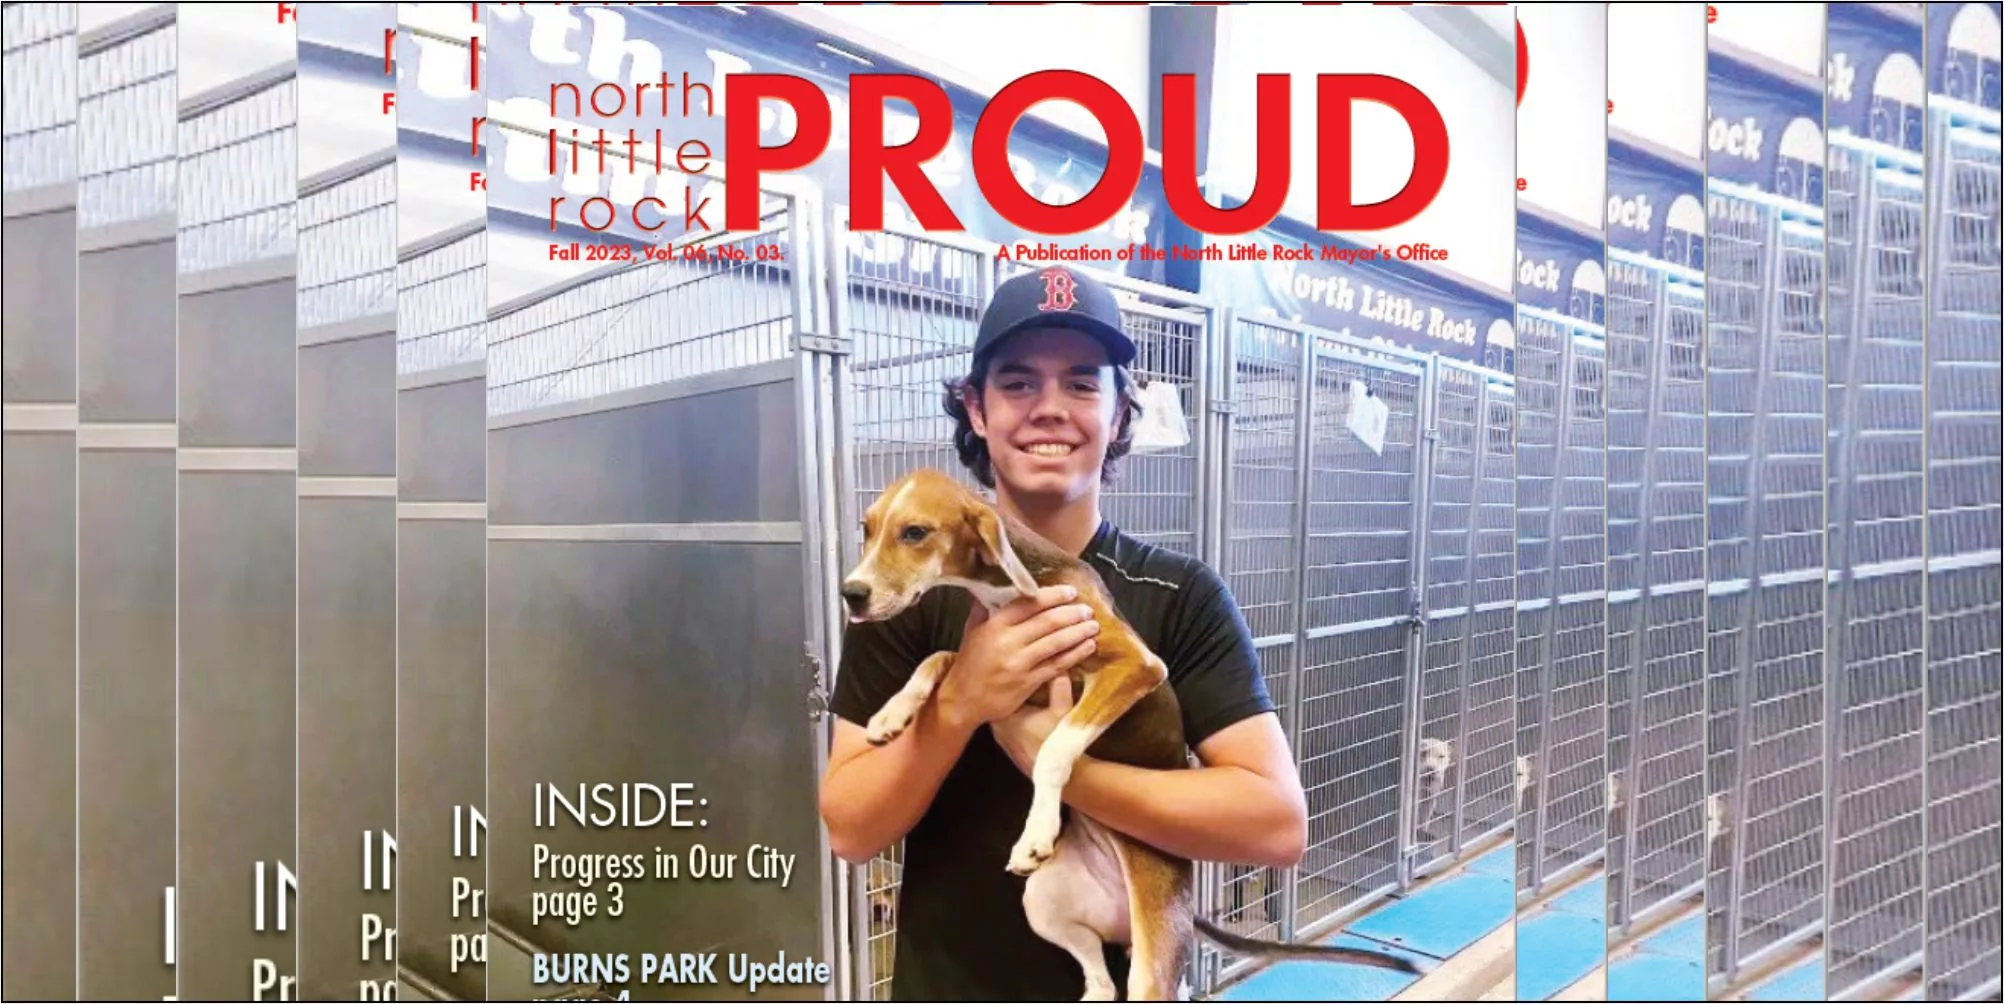 image of PROUD with boy and dog